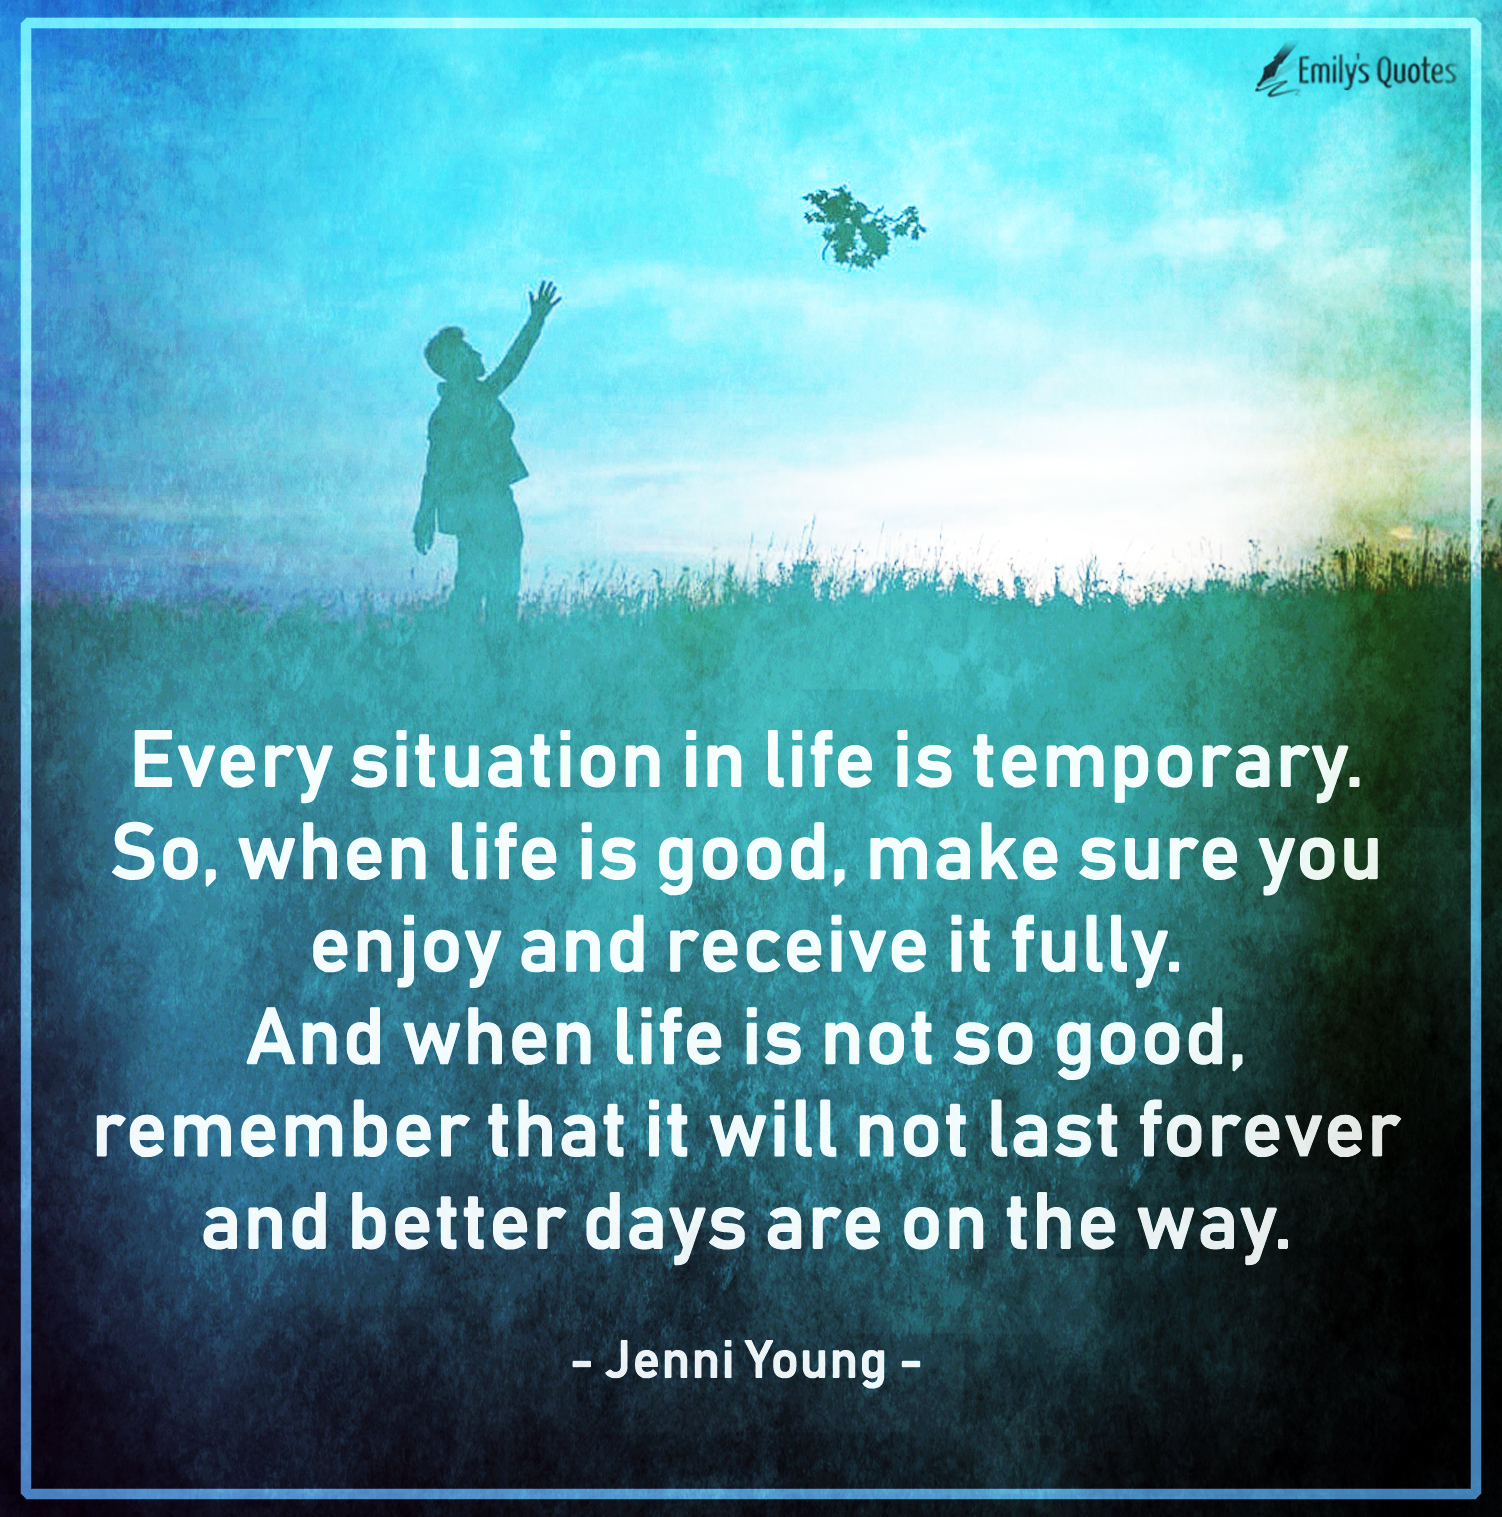 Every situation in life is temporary. So, when life is good, make sure you enjoy